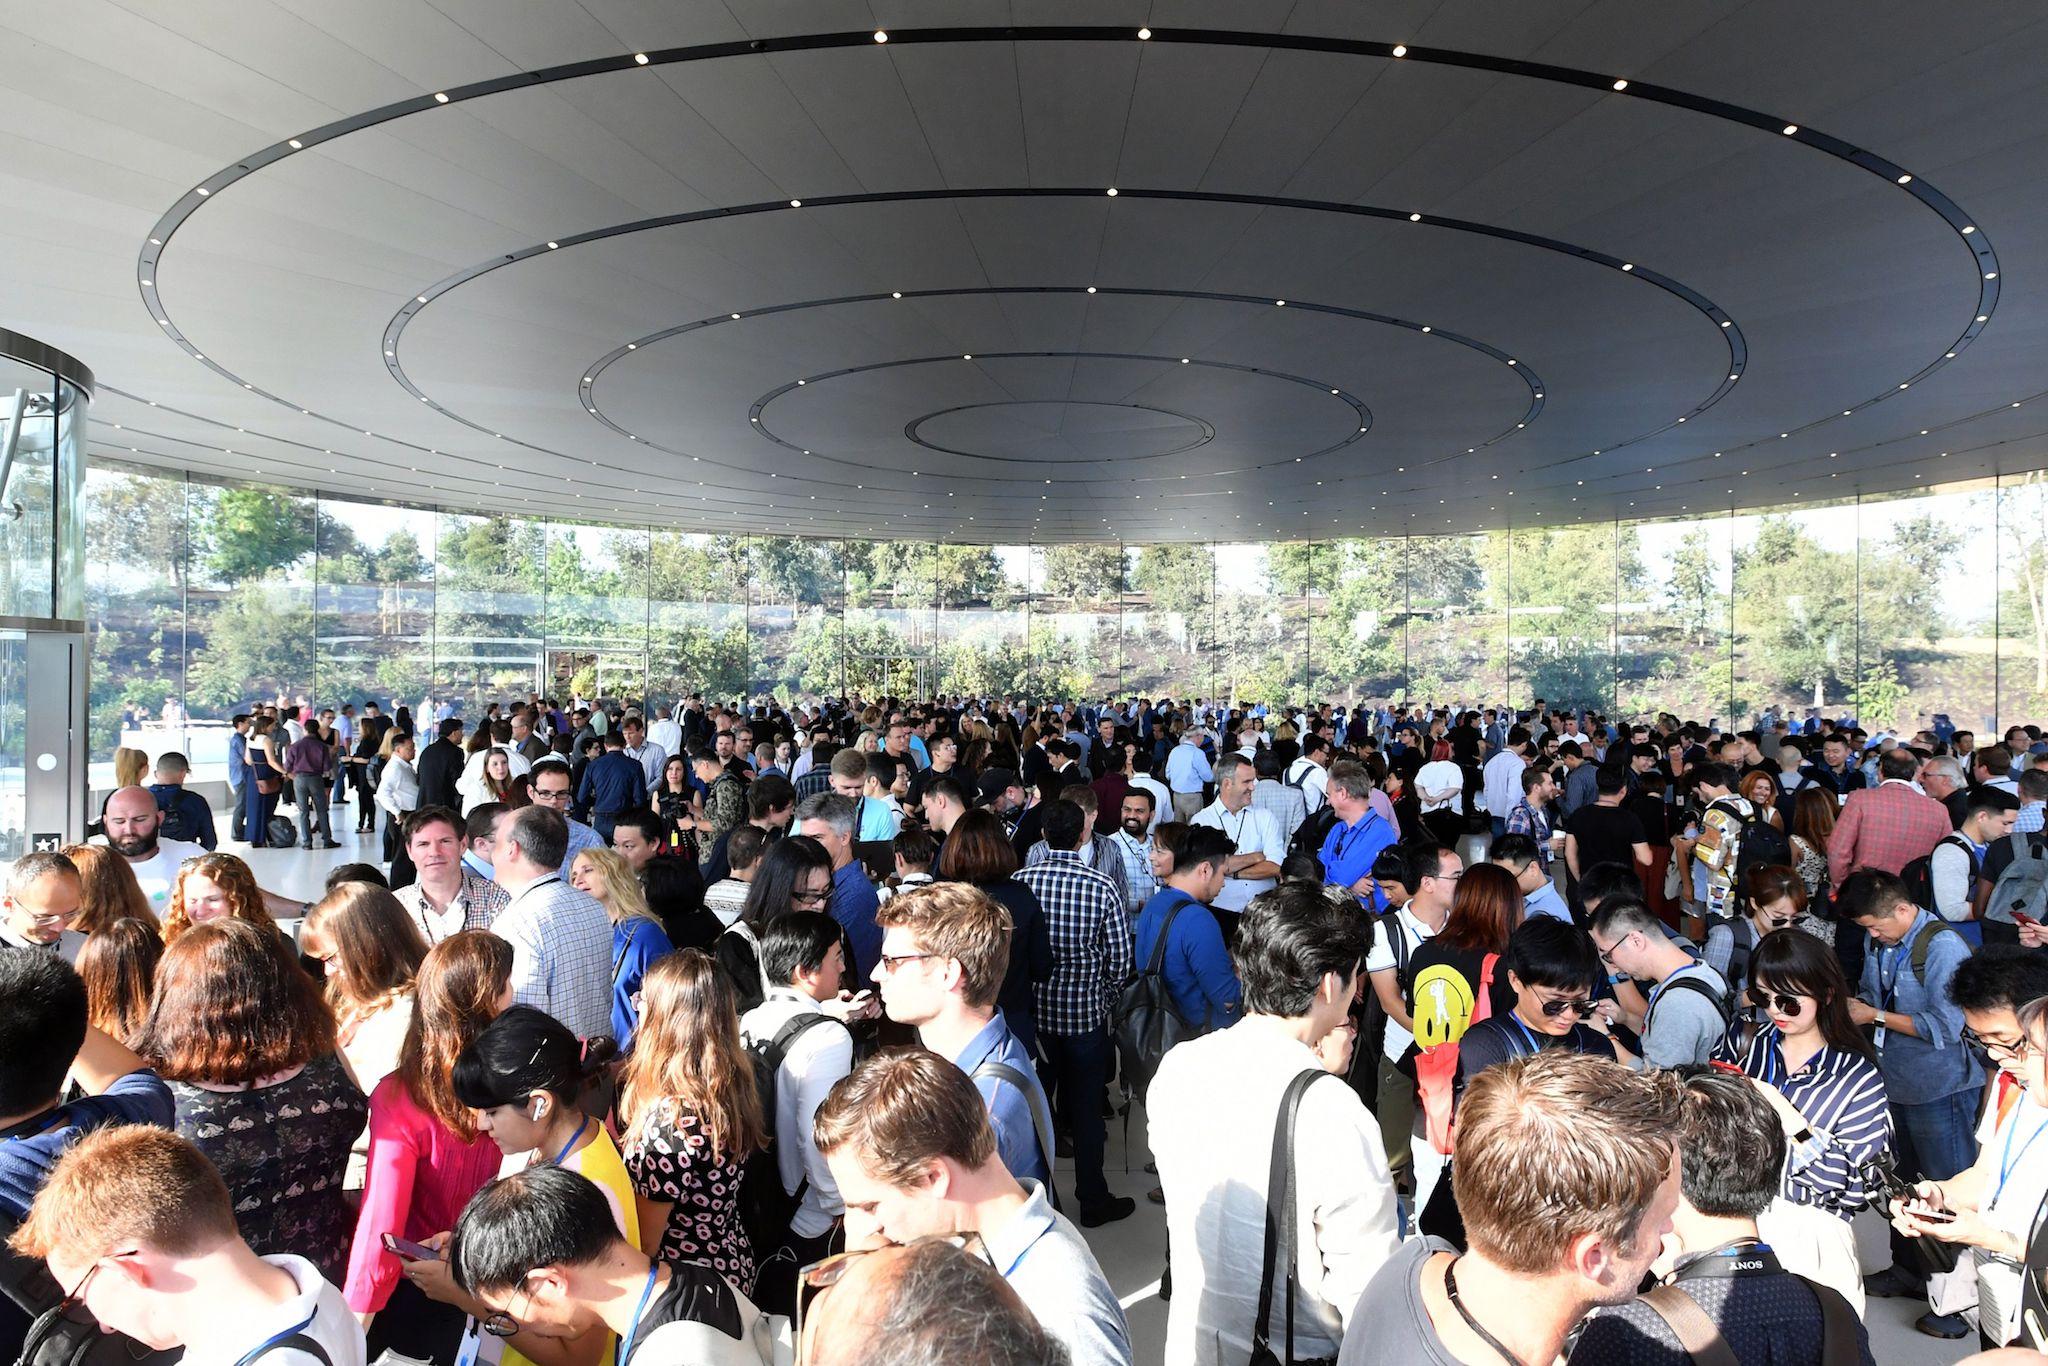 A crowd of people wait to enter the Steve Jobs Theater ahead of a media event